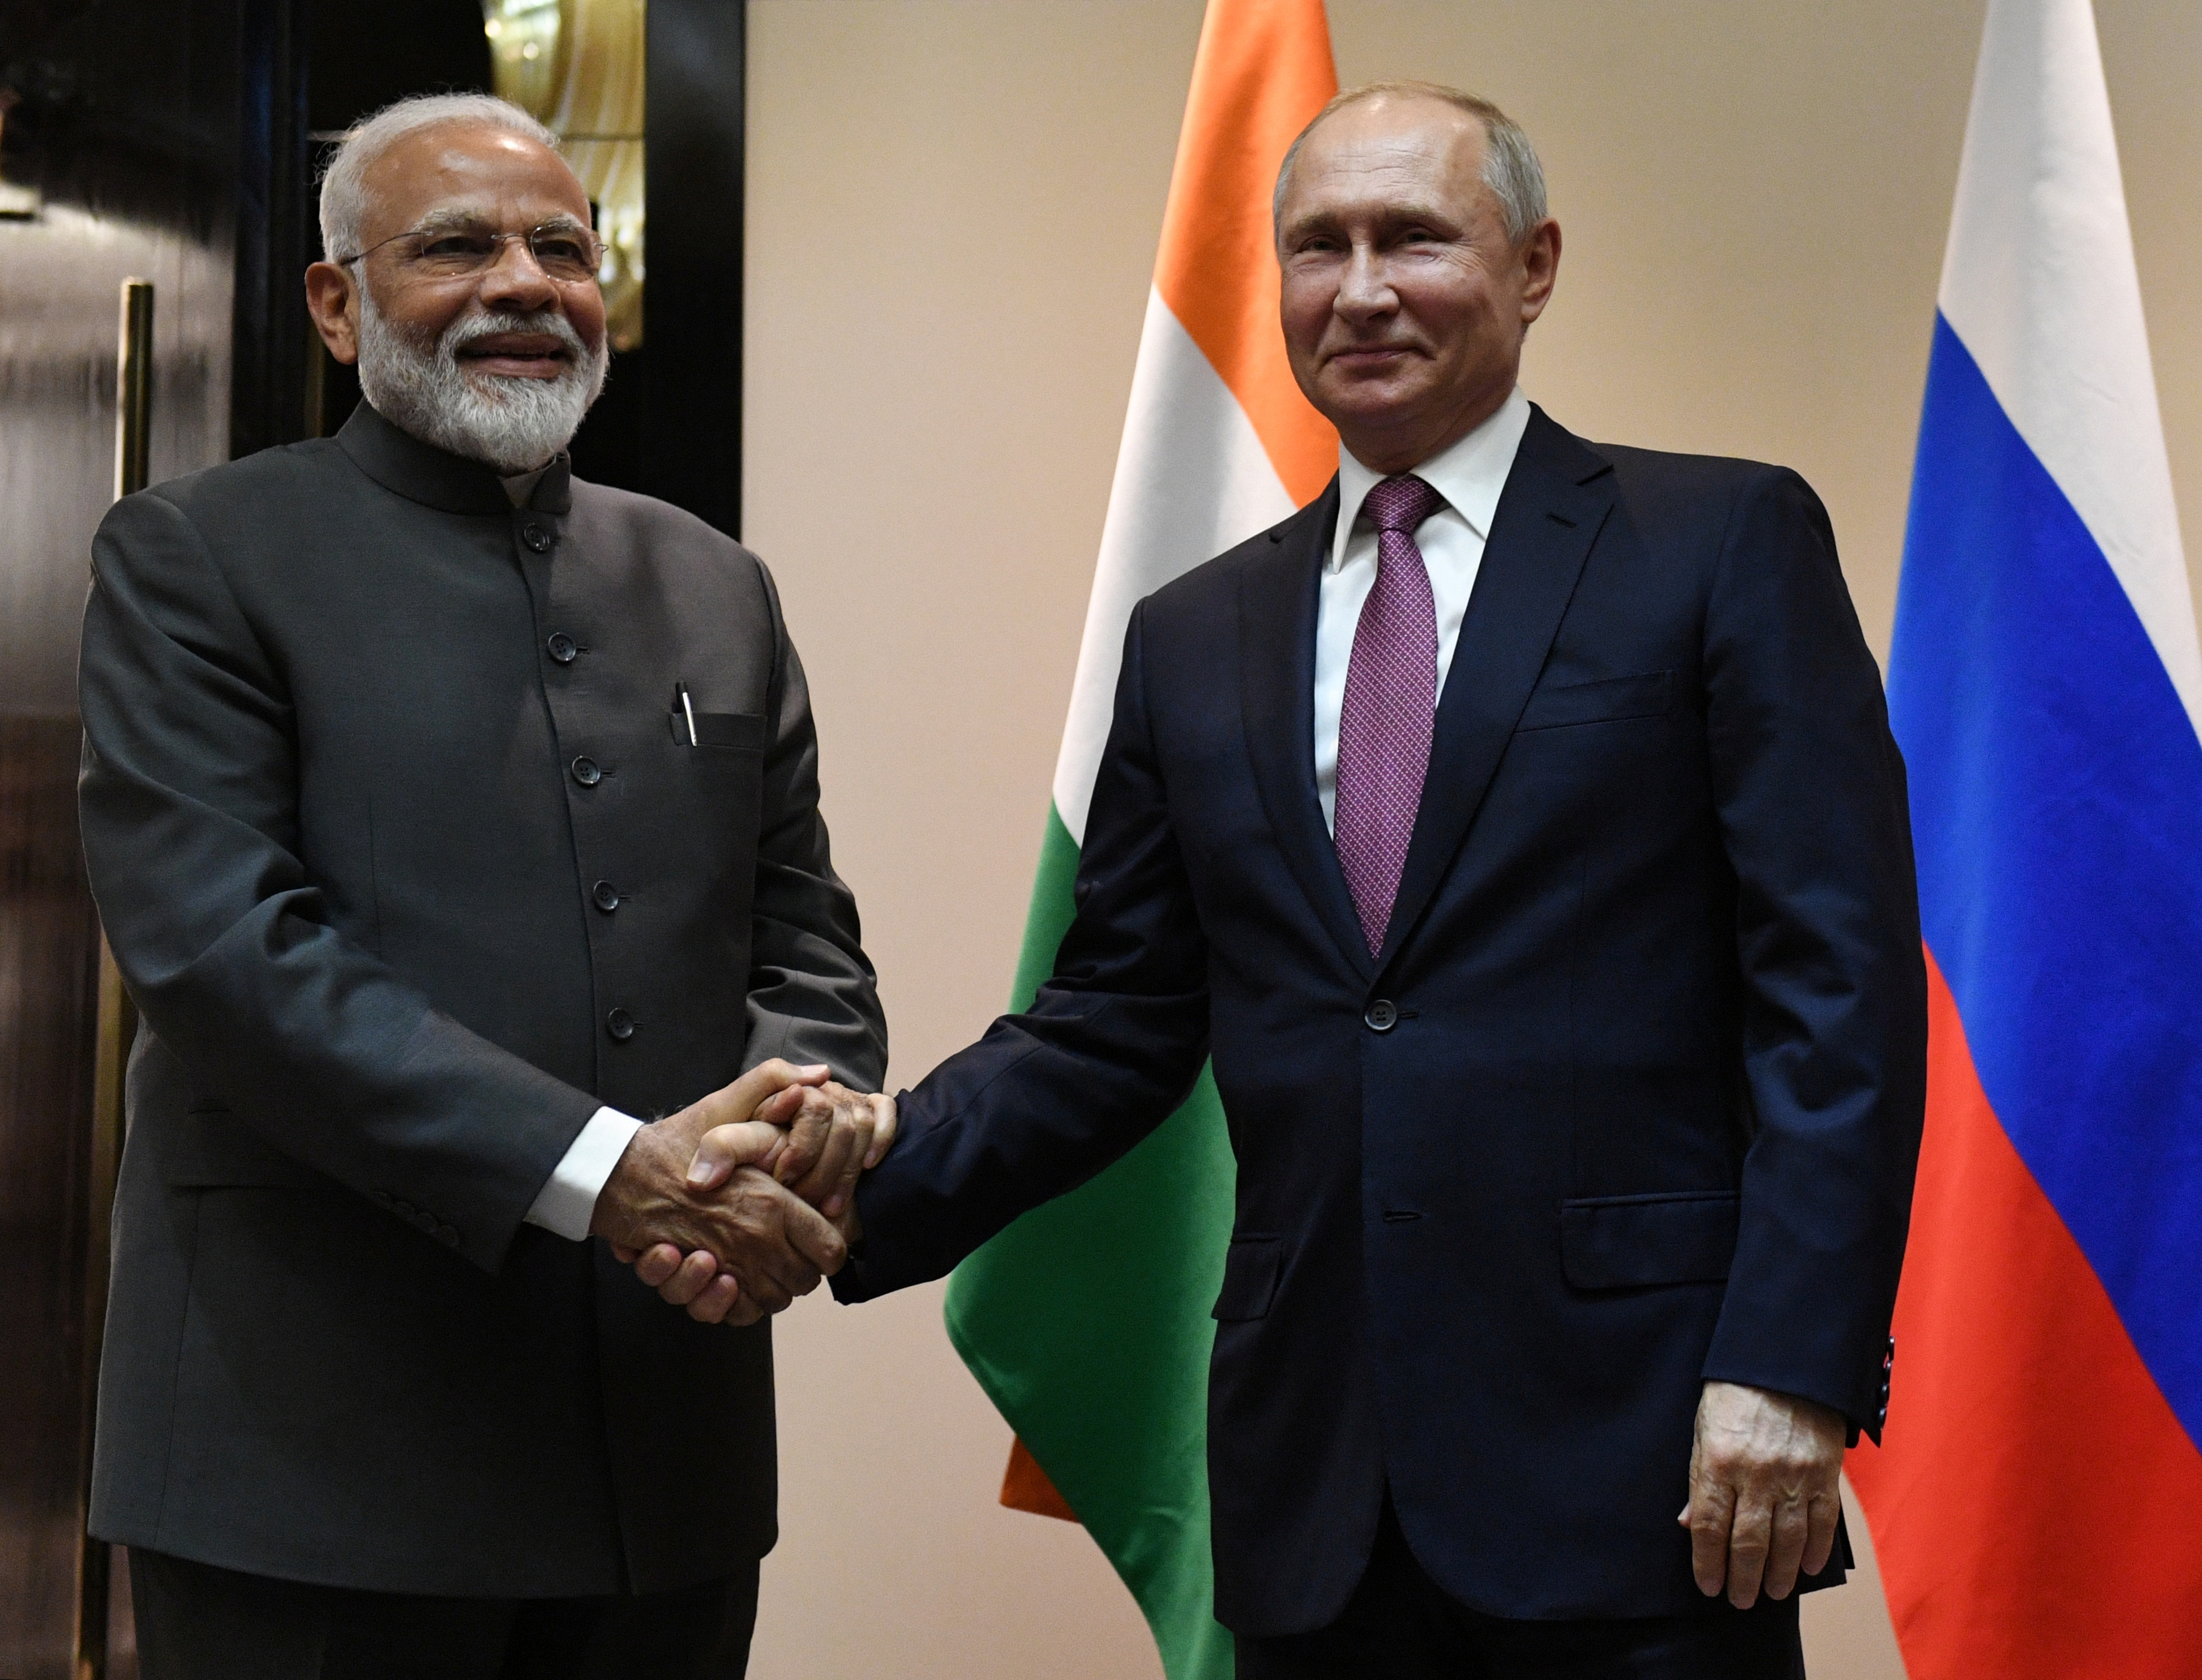 Russian President Putin meets with Indian Prime Minister Modi on the sidelines of the SCO summit in Bishkek